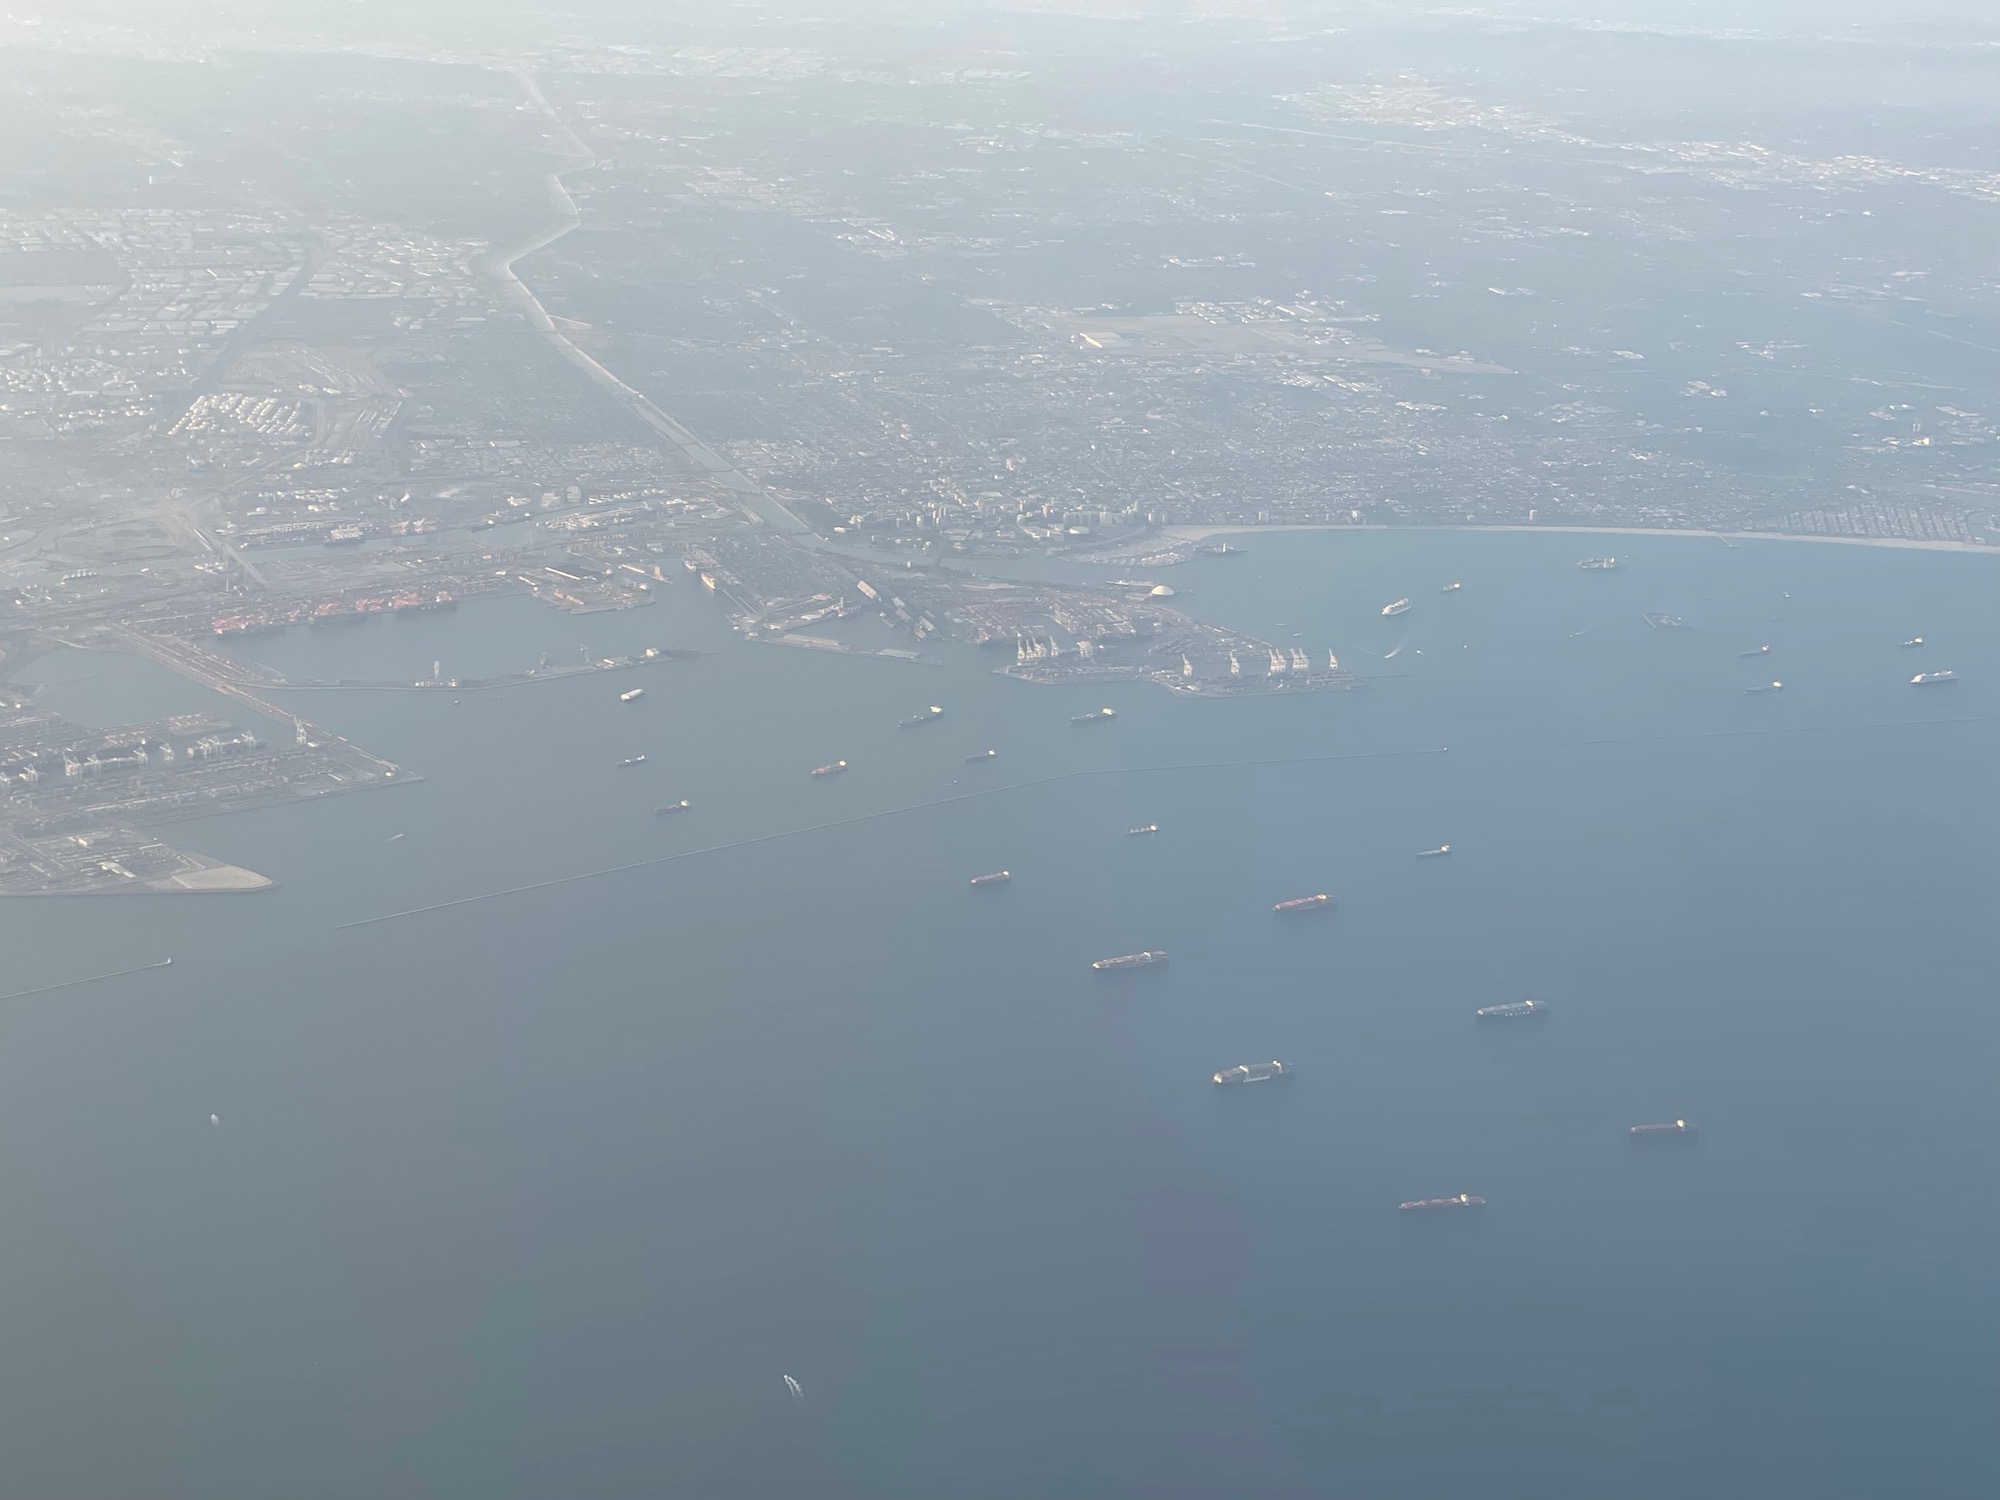 aerial view of a city and ships in the water